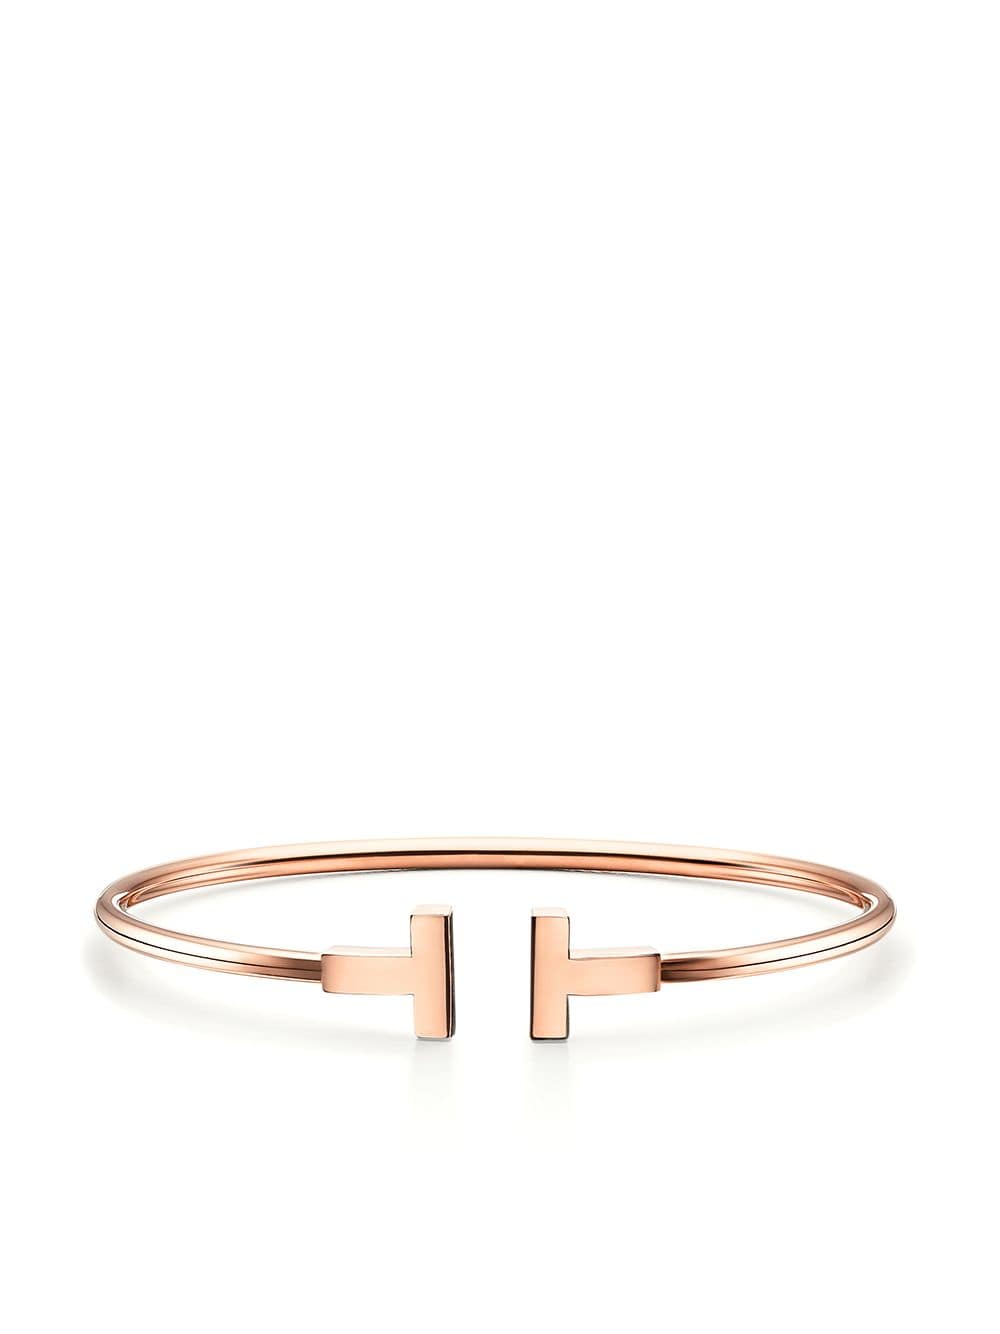 Tiffany & Co - 18Kt Rose Gold Tiffany T Wire Cuff | ABOUT ICONS